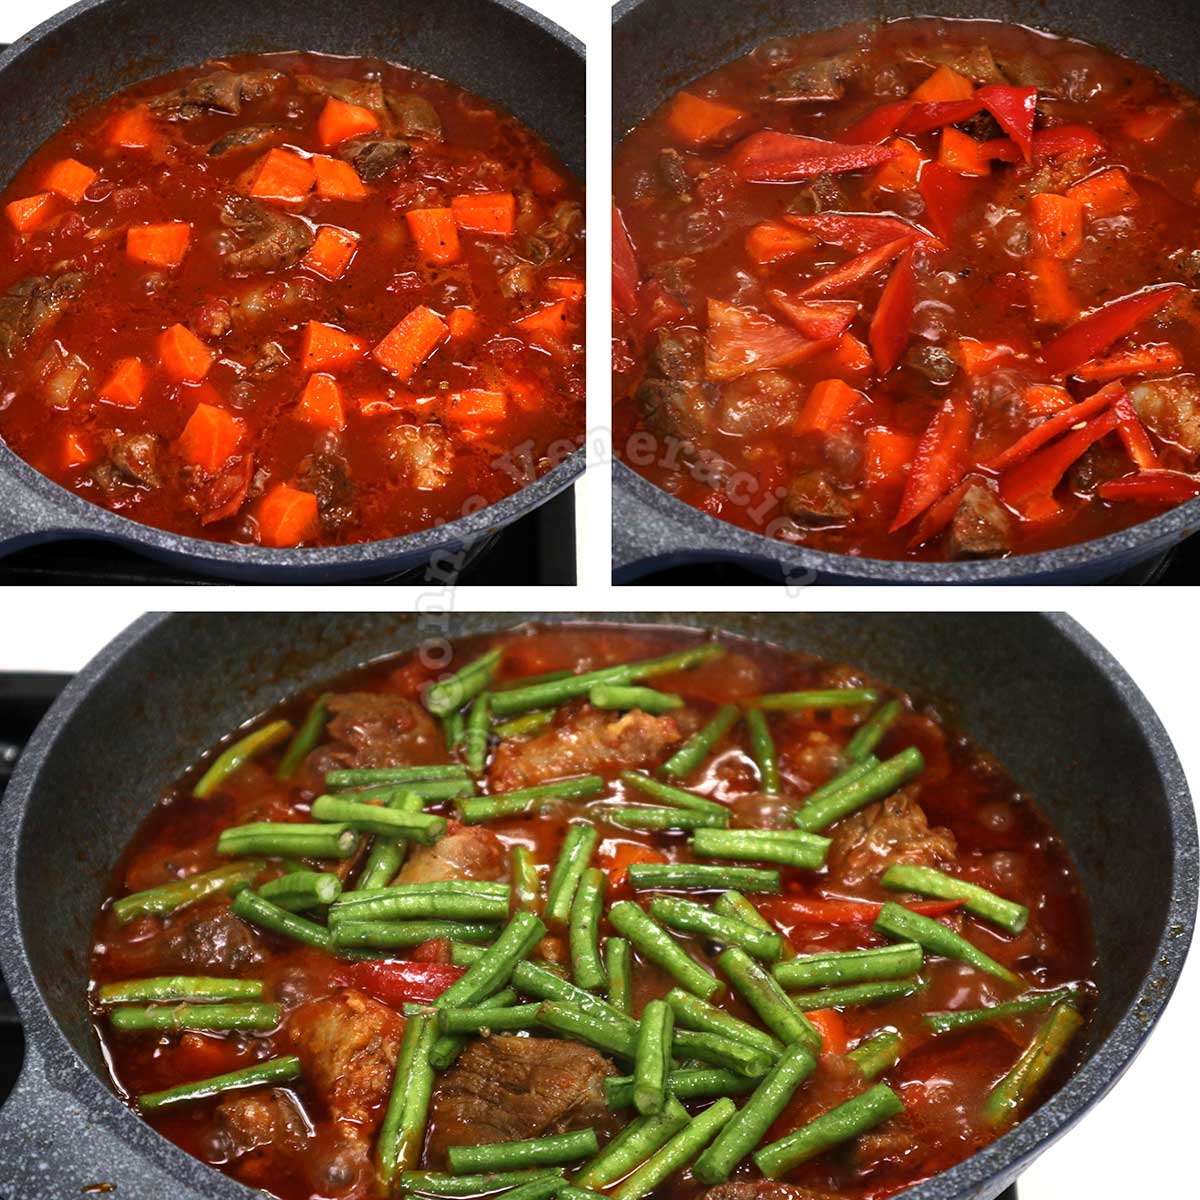 Adding carrot, bell pepper and long beans to beef and sausage stew